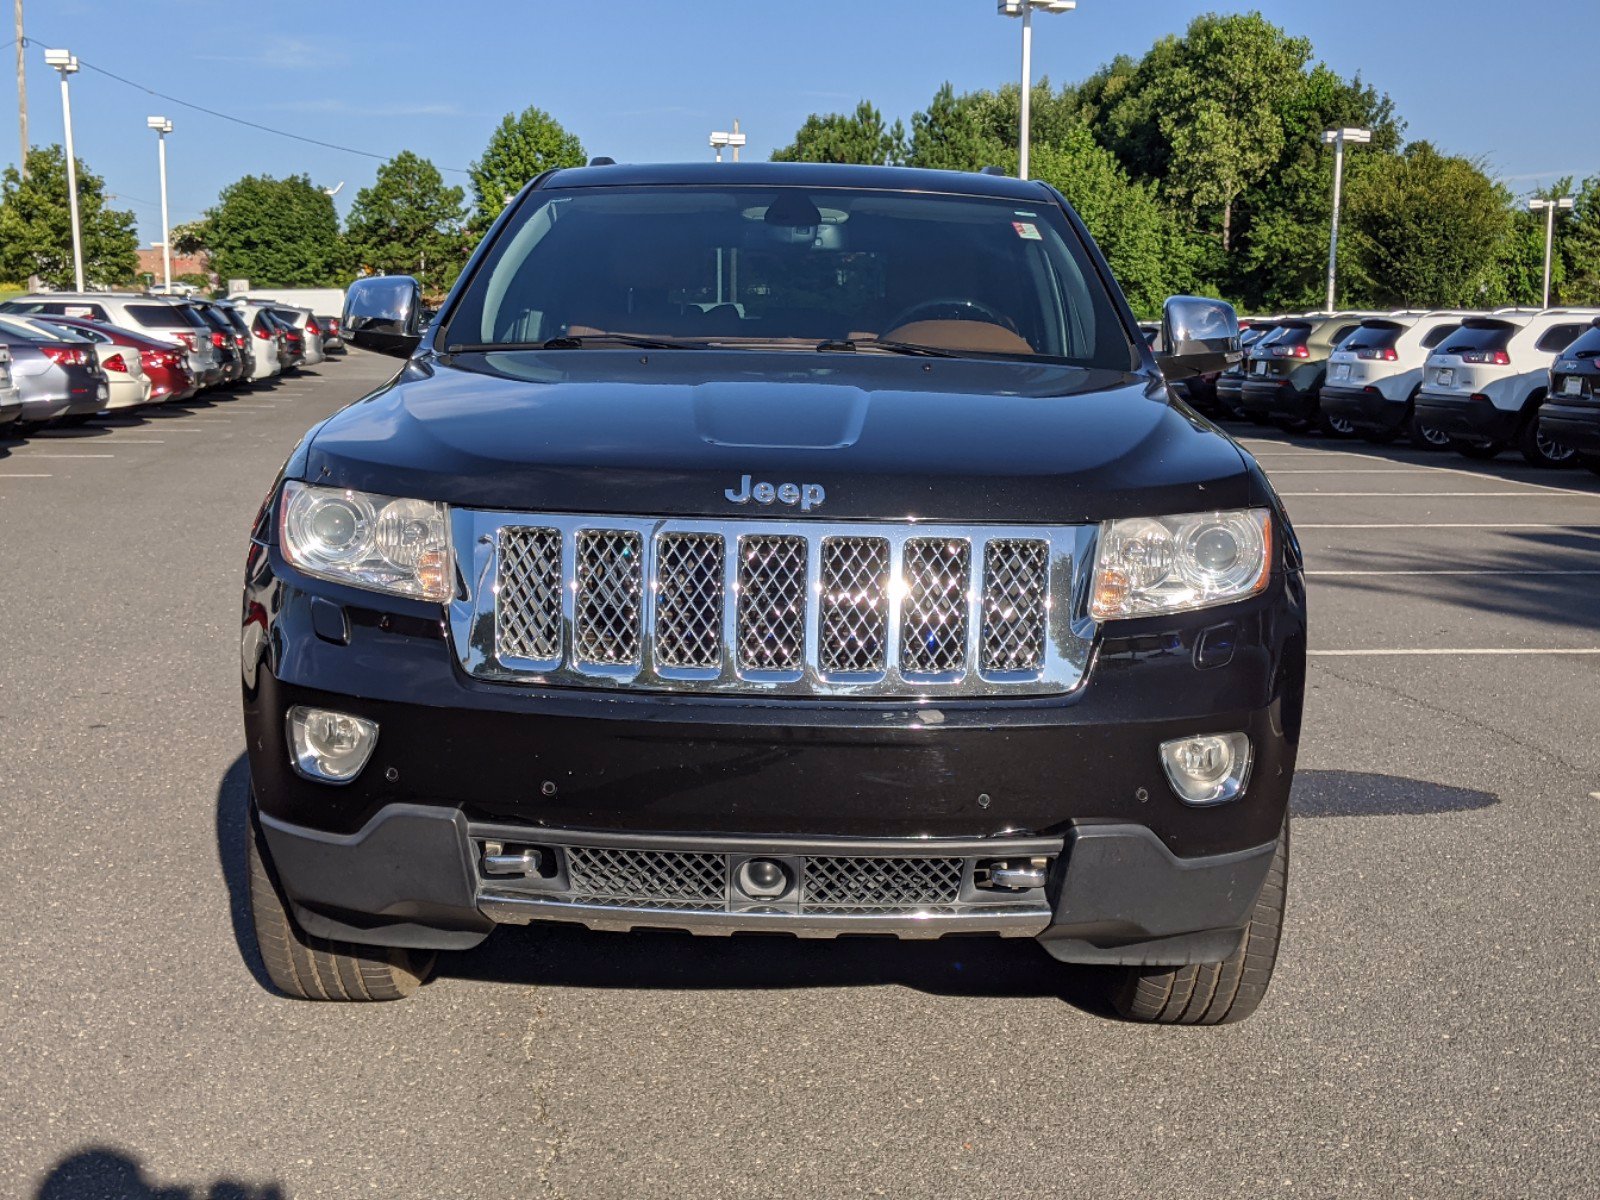 PreOwned 2013 Jeep Grand Cherokee Overland Summit With